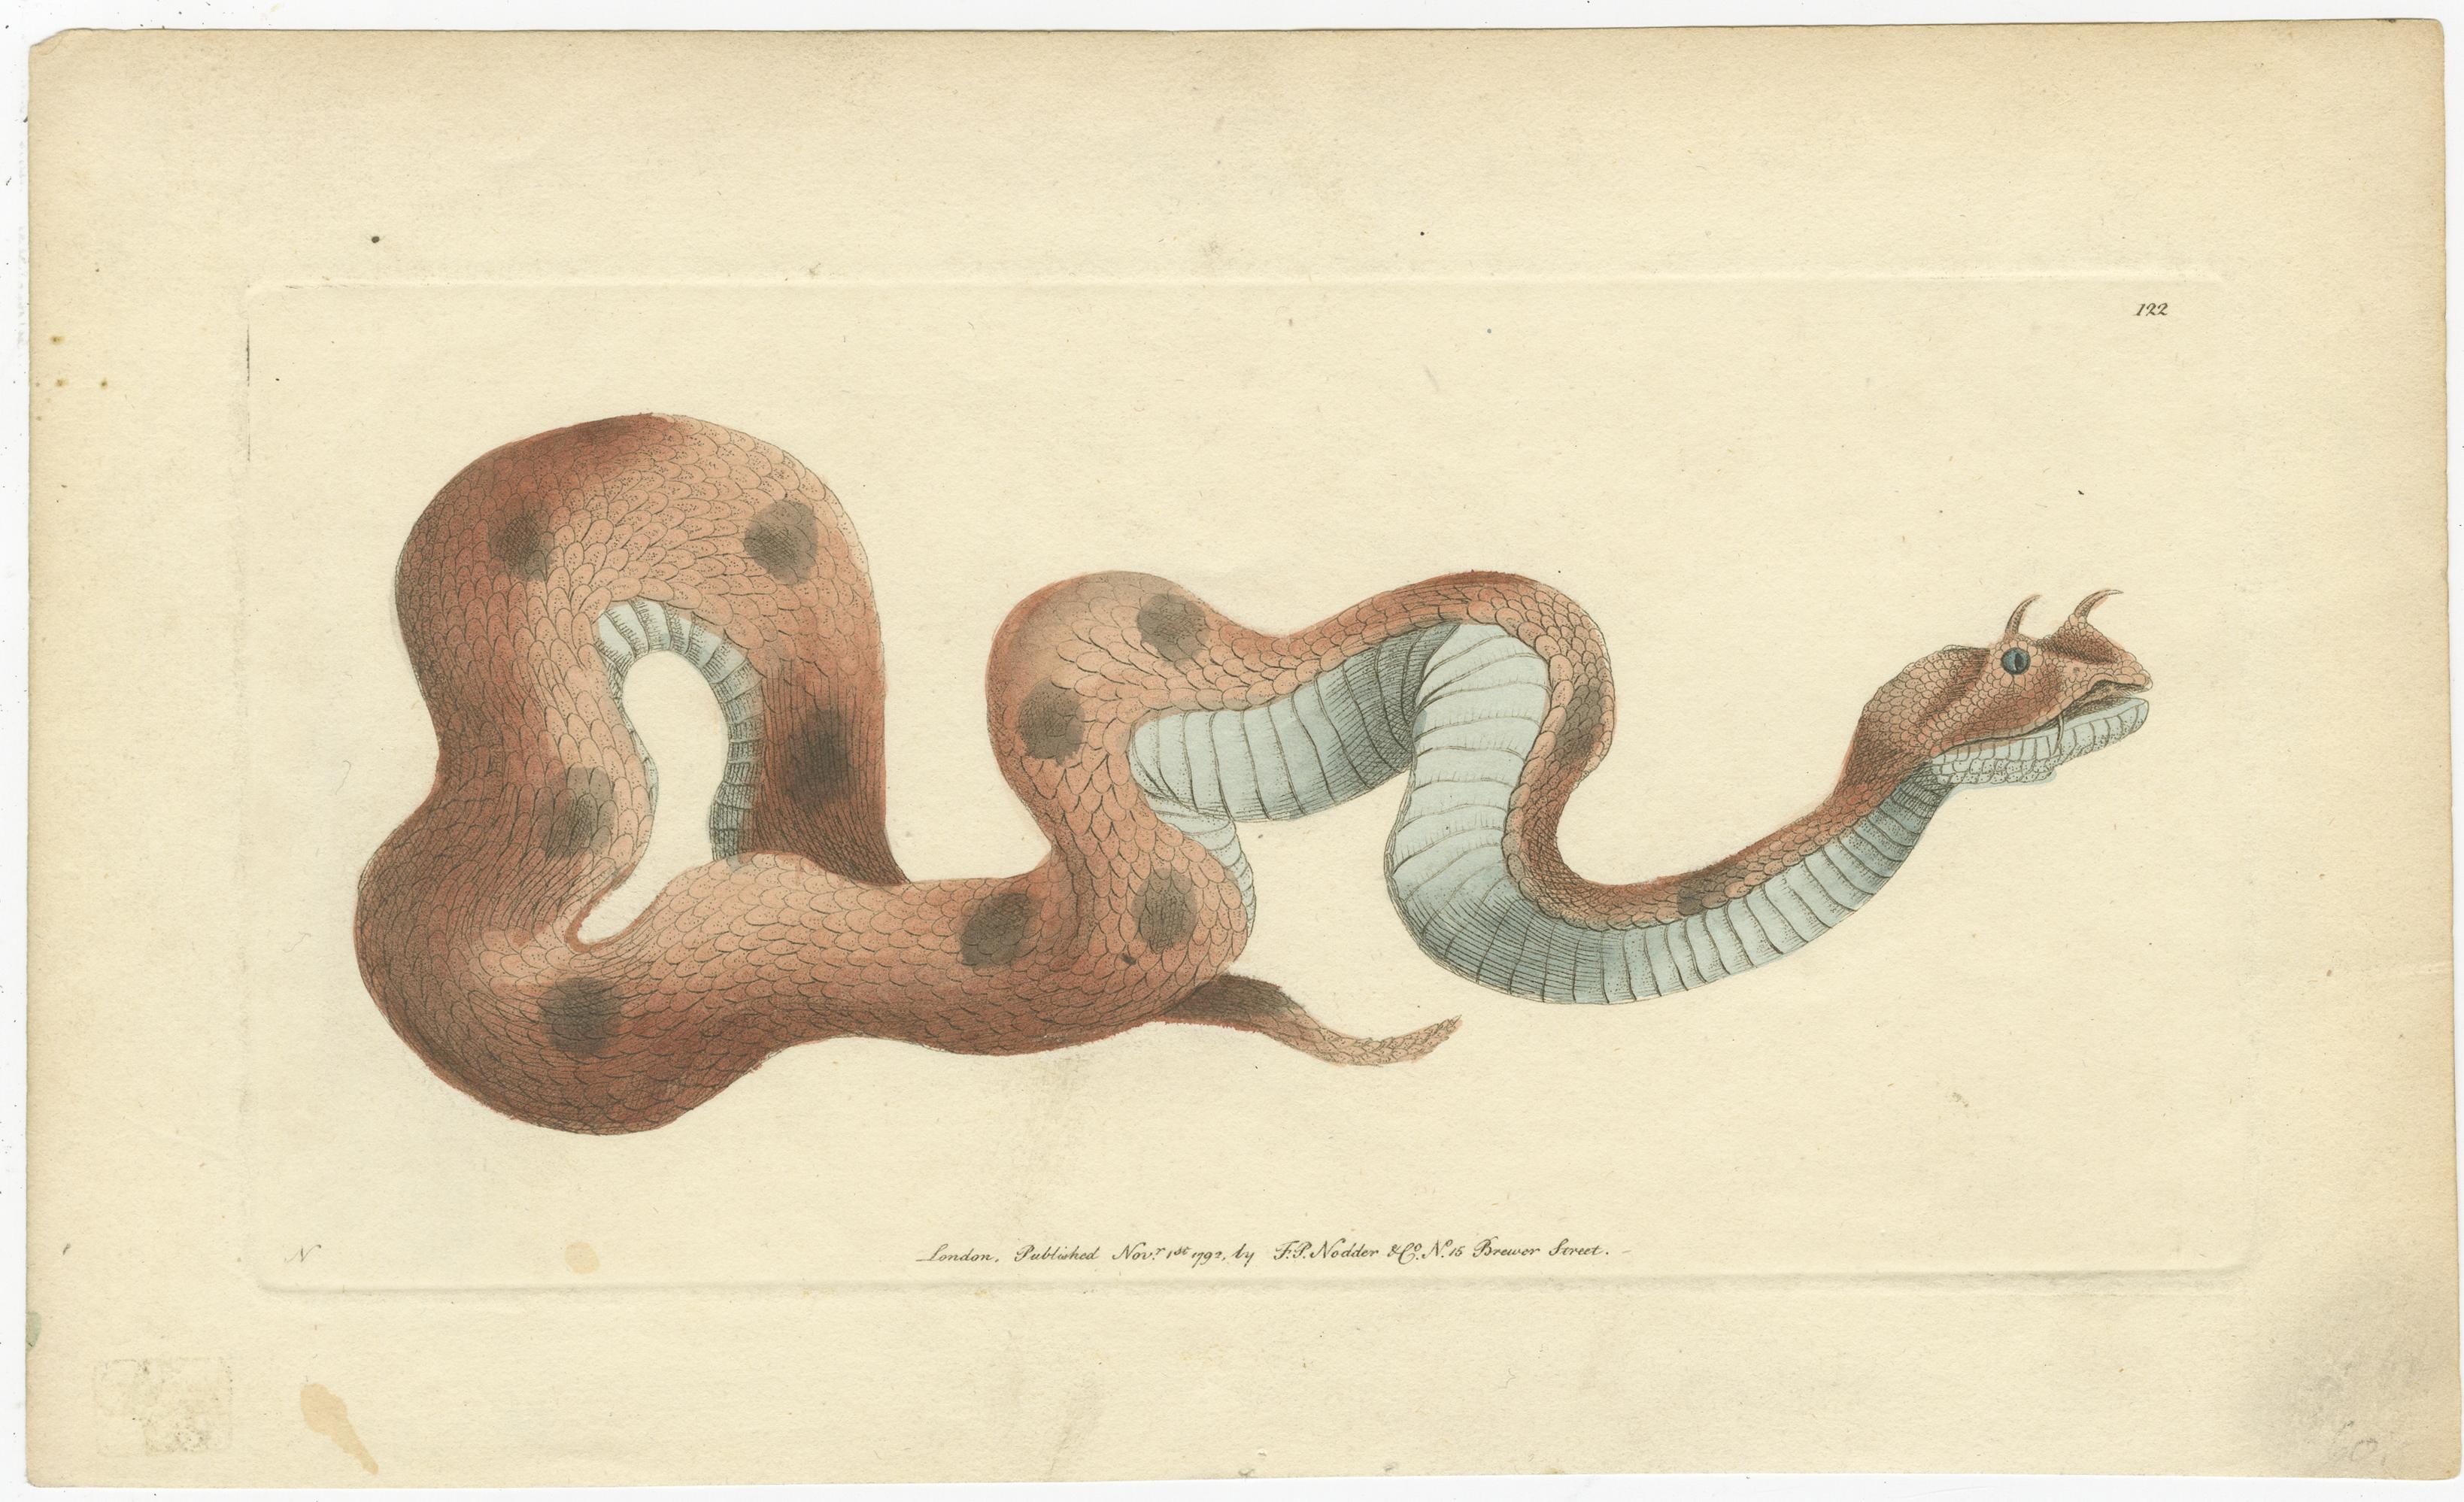 Antique snake print of a Saharan or desert horned viper, Cerastes cerastes. This print originates from George Shaw and Frederick Nodders 'The Naturalists Miscellany', 1792.